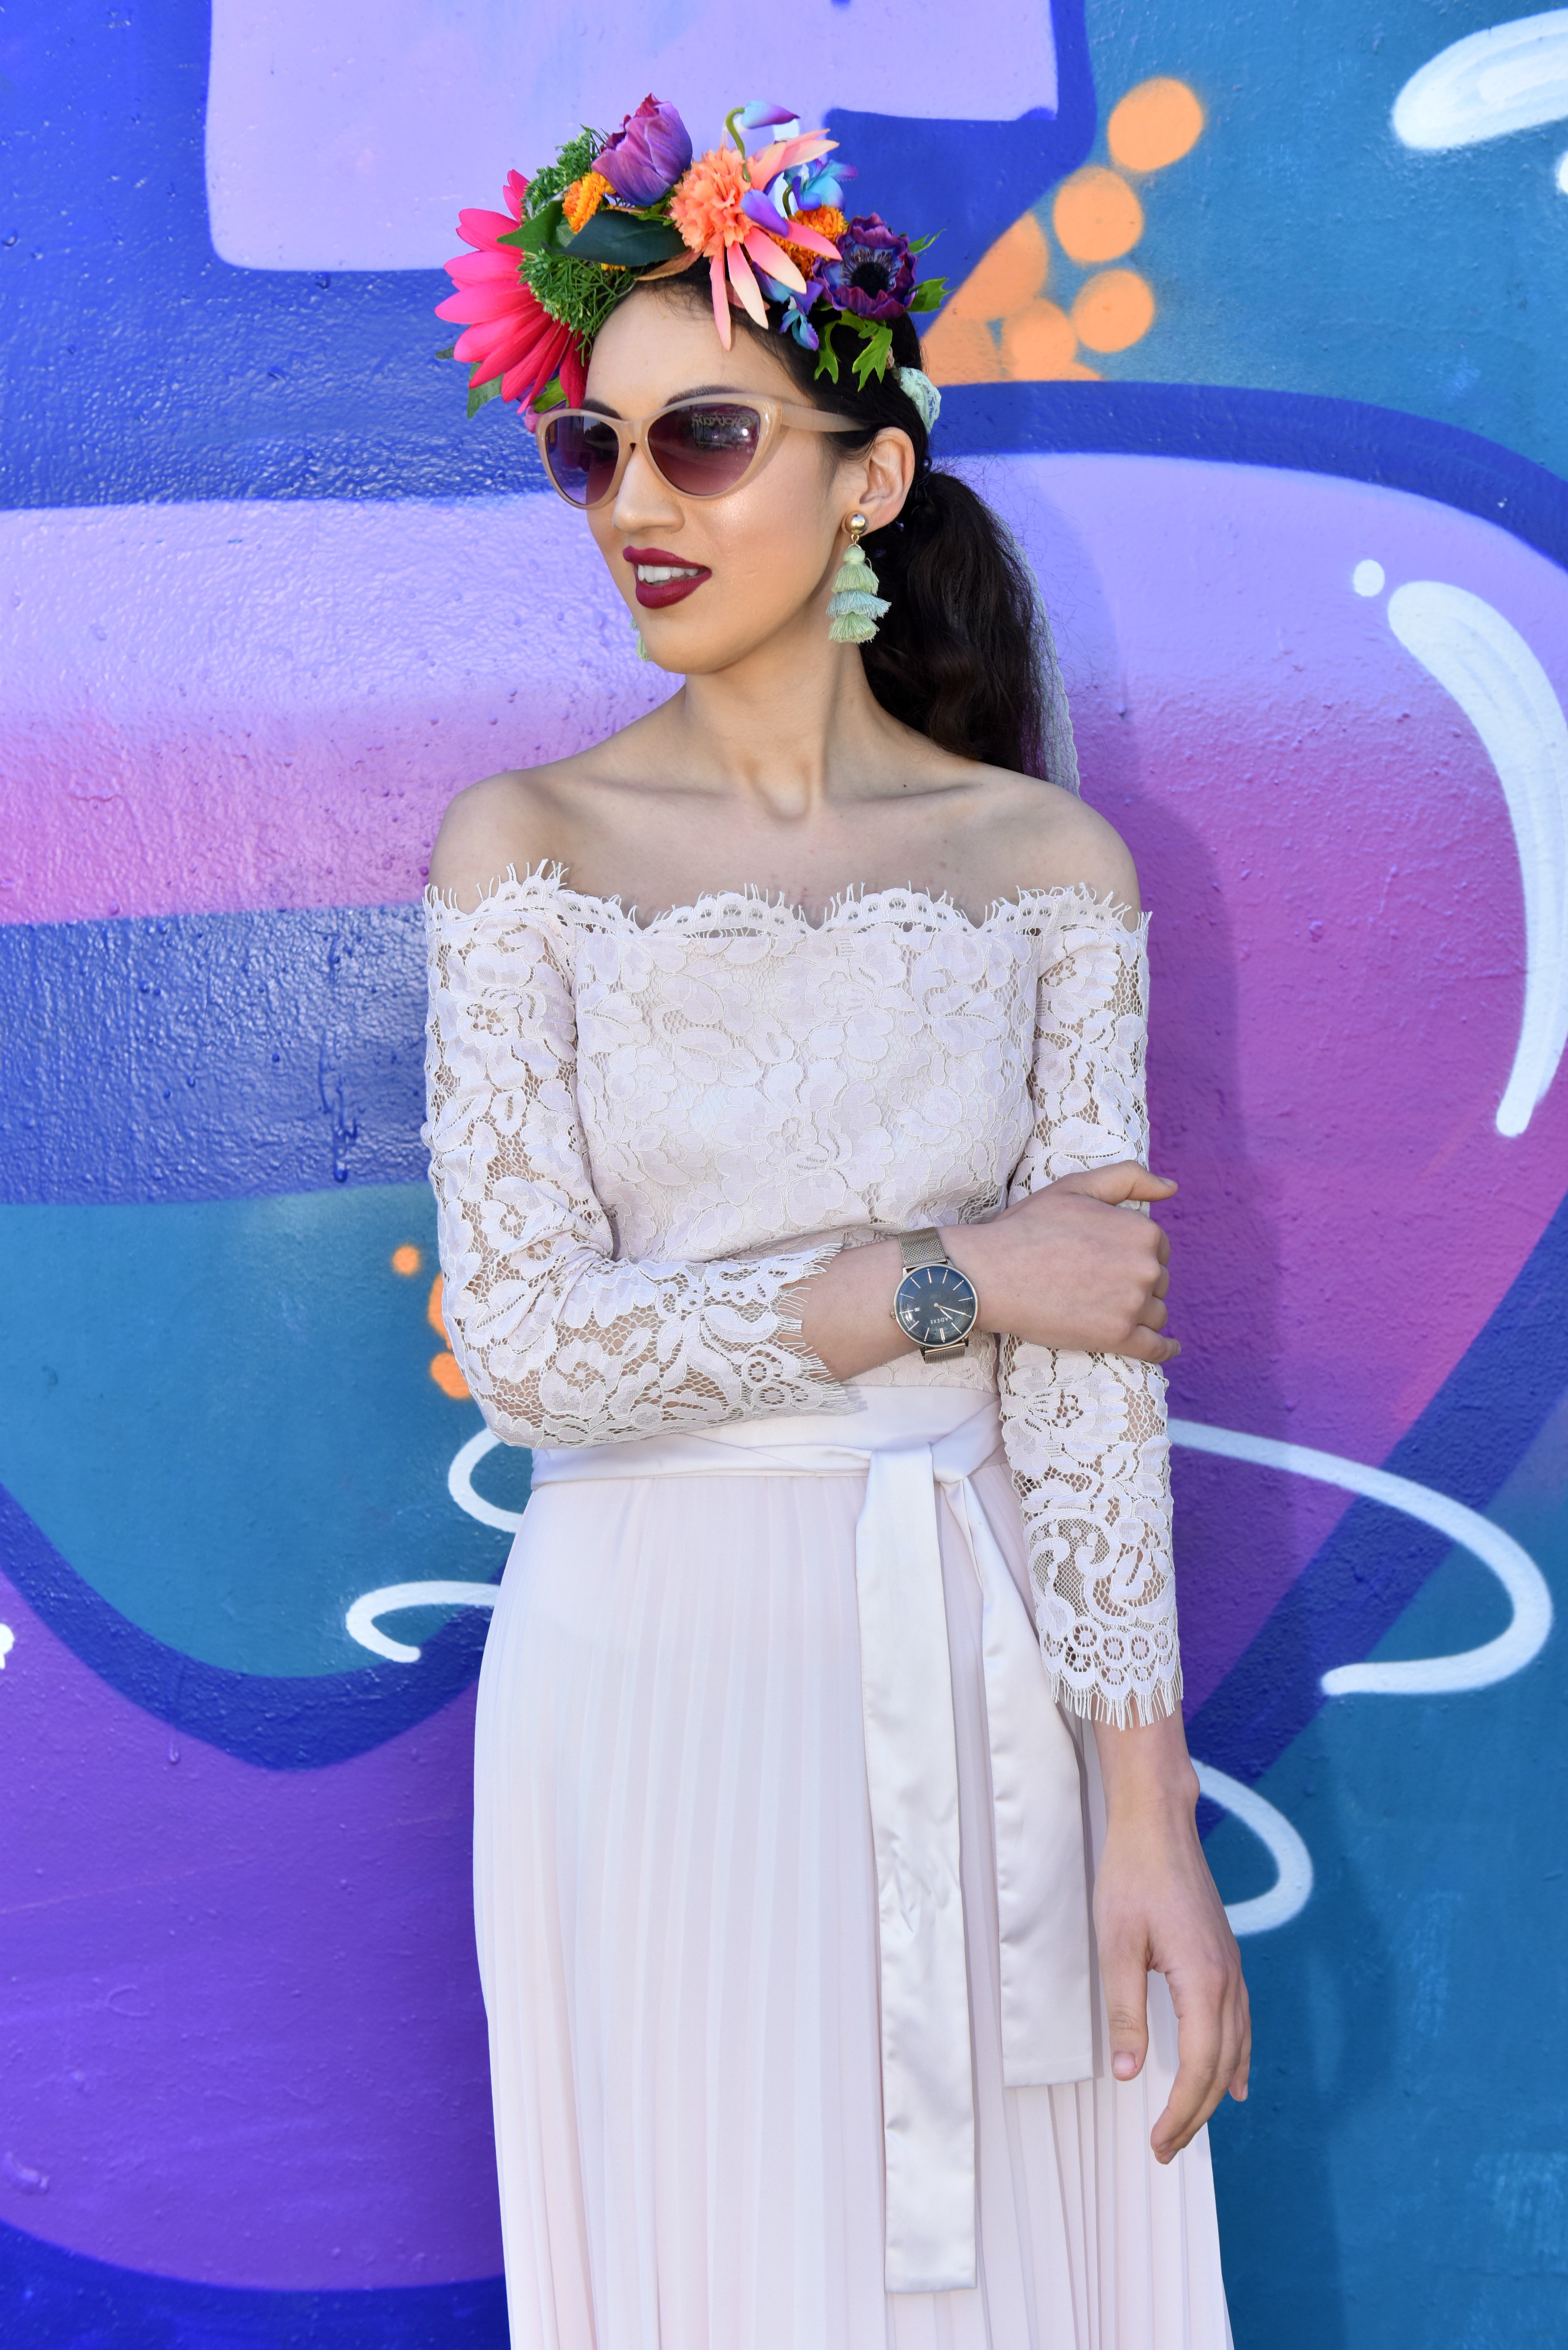  <img src="ana.jpg" alt="ana pink tinted sunglasses new look how to style a bridesmaid dress"/>